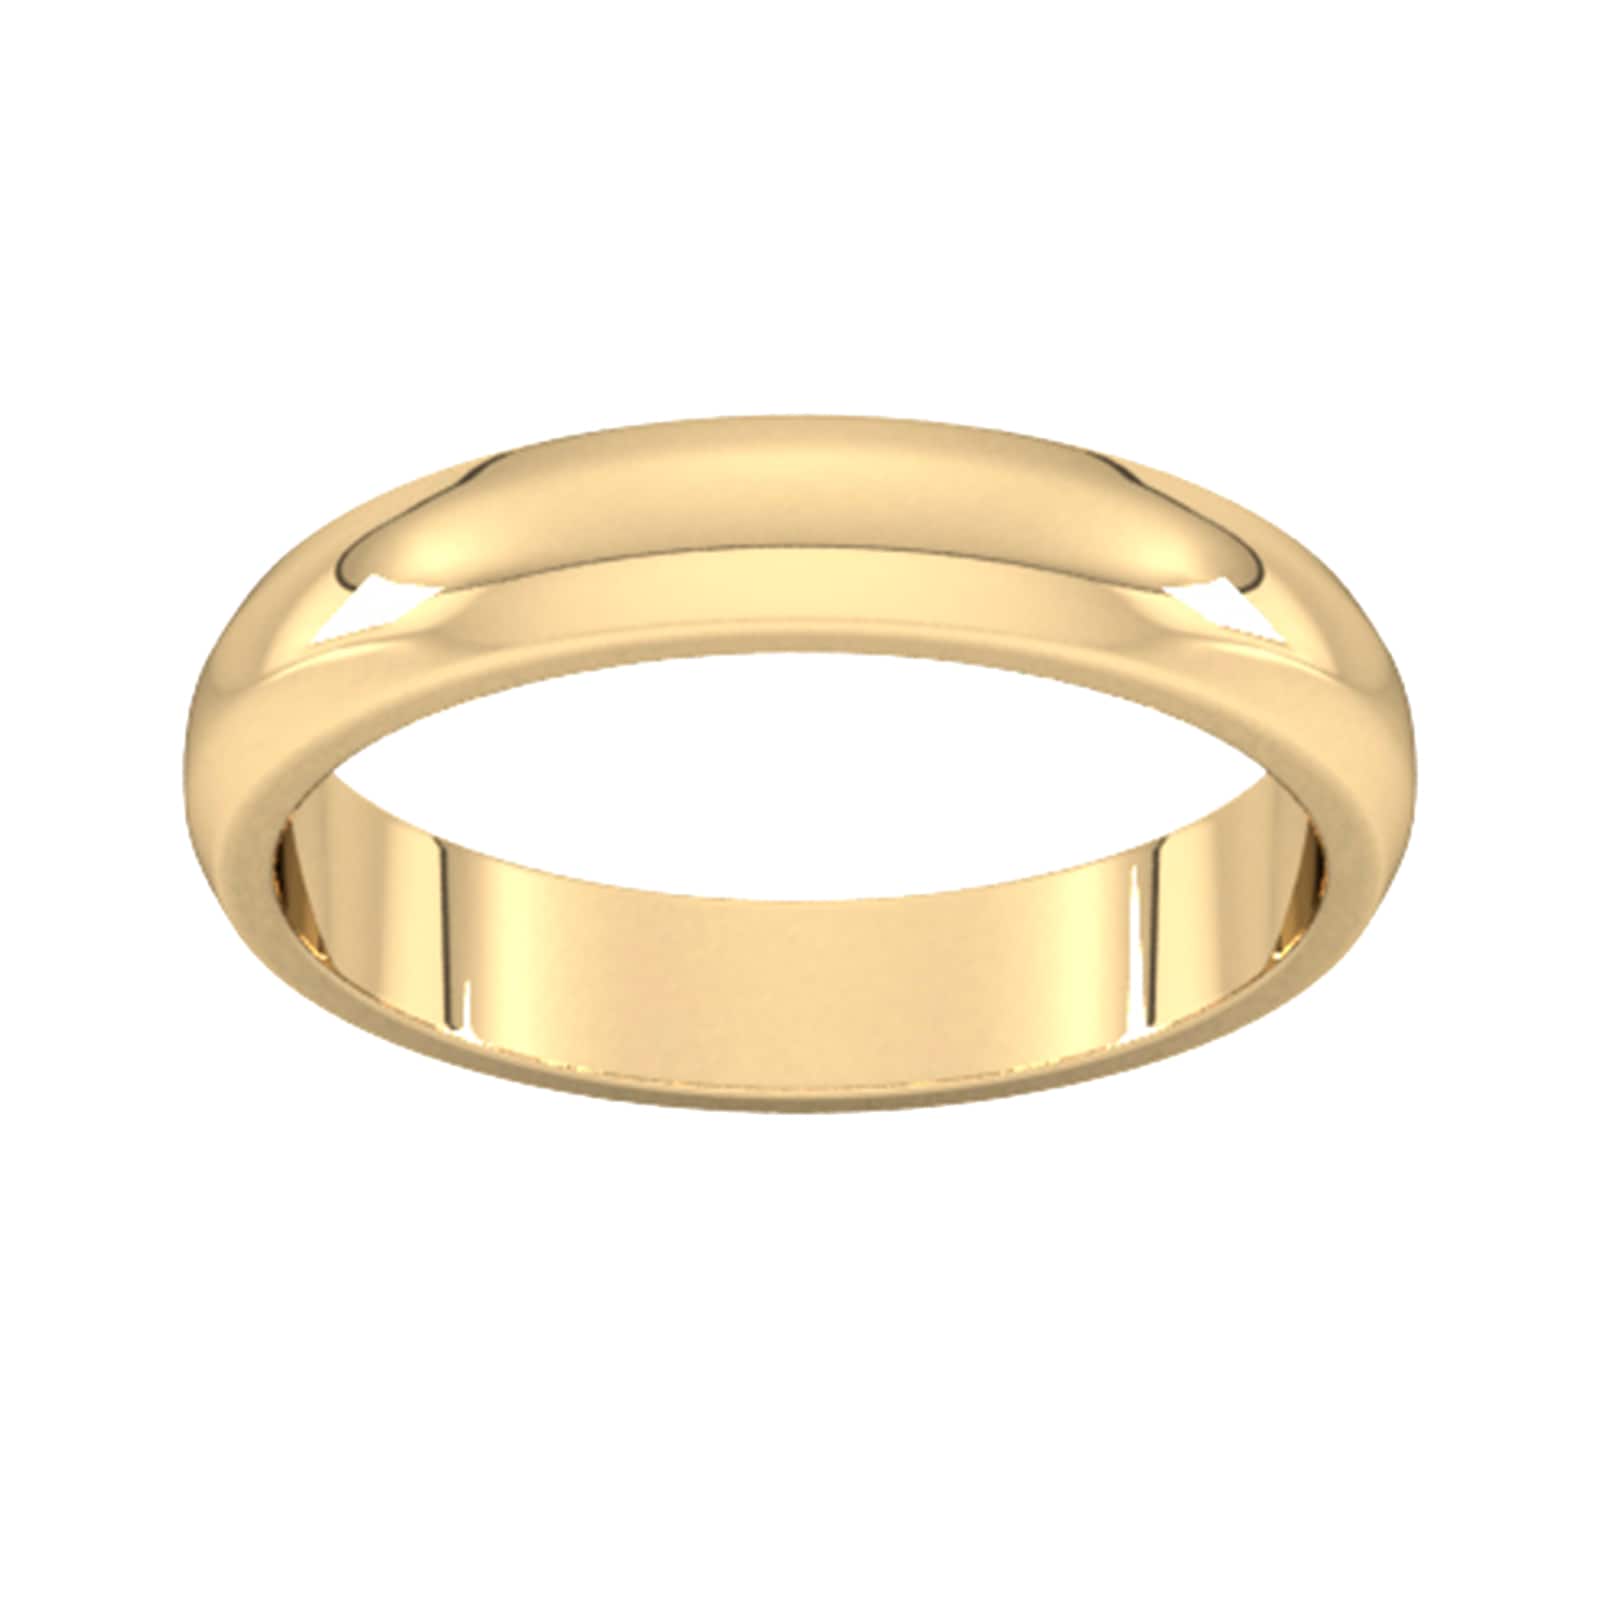 4mm D Shape Heavy Wedding Ring In 9 Carat Yellow Gold - Ring Size T